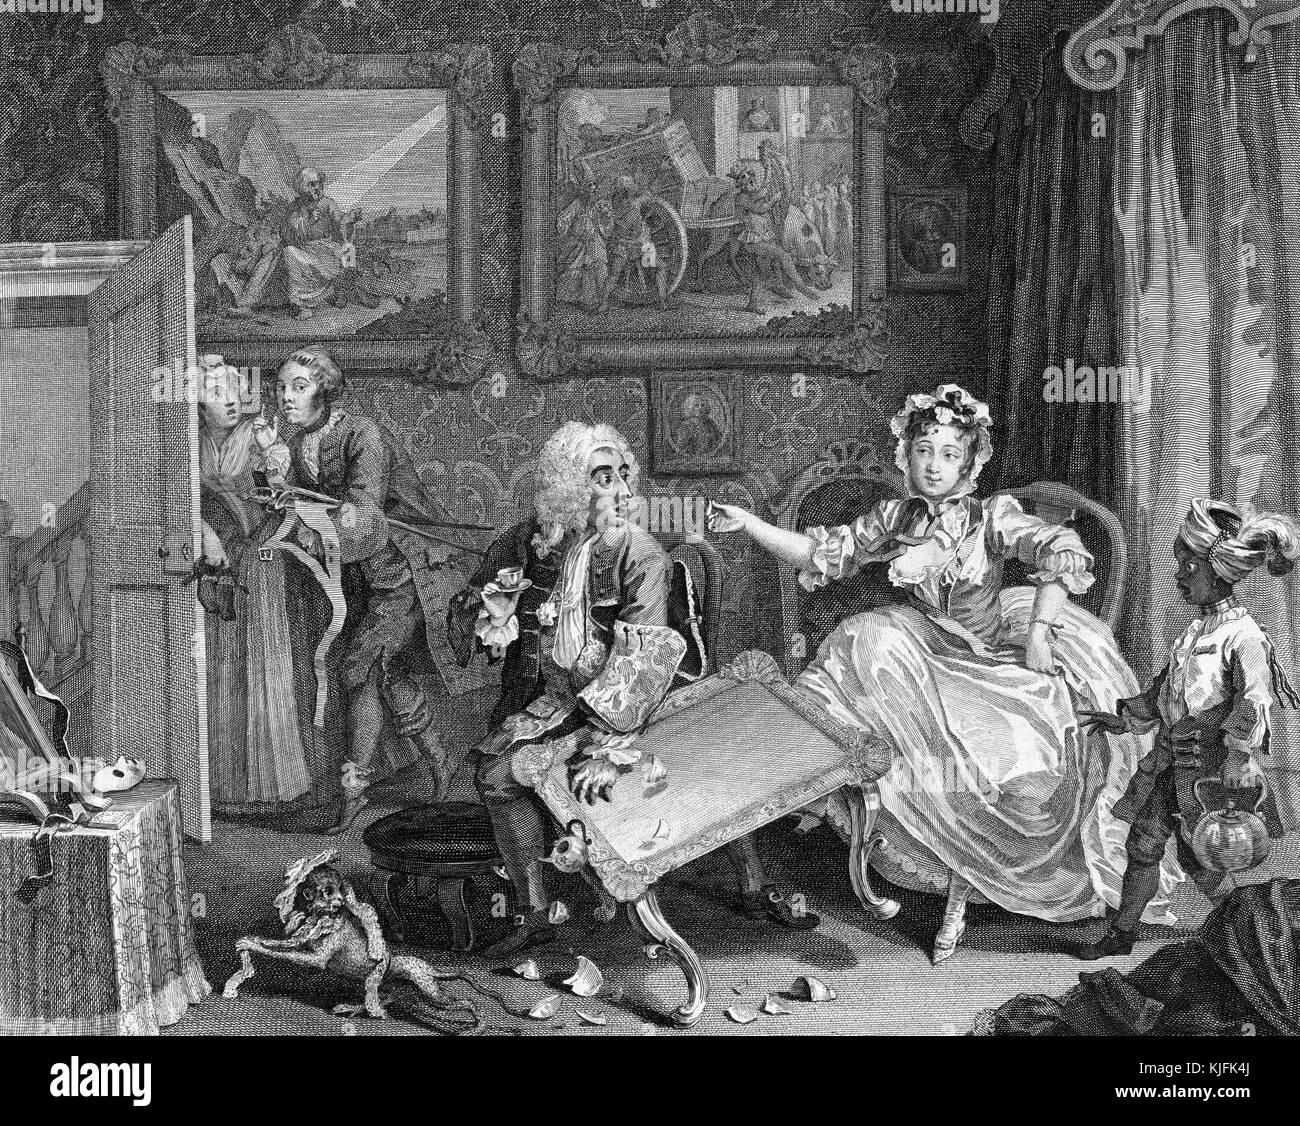 Engraving on paper, titled 'A Harlot's Progress, Plate 2, Moll is now a kept woman, the mistress of a wealthy merchant', she keeps a West Indian serving boy and a monkey, there are jars of cosmetics, and a mask from masquerades, by William Hogarth, 1732. From the New York Public Library. Stock Photo